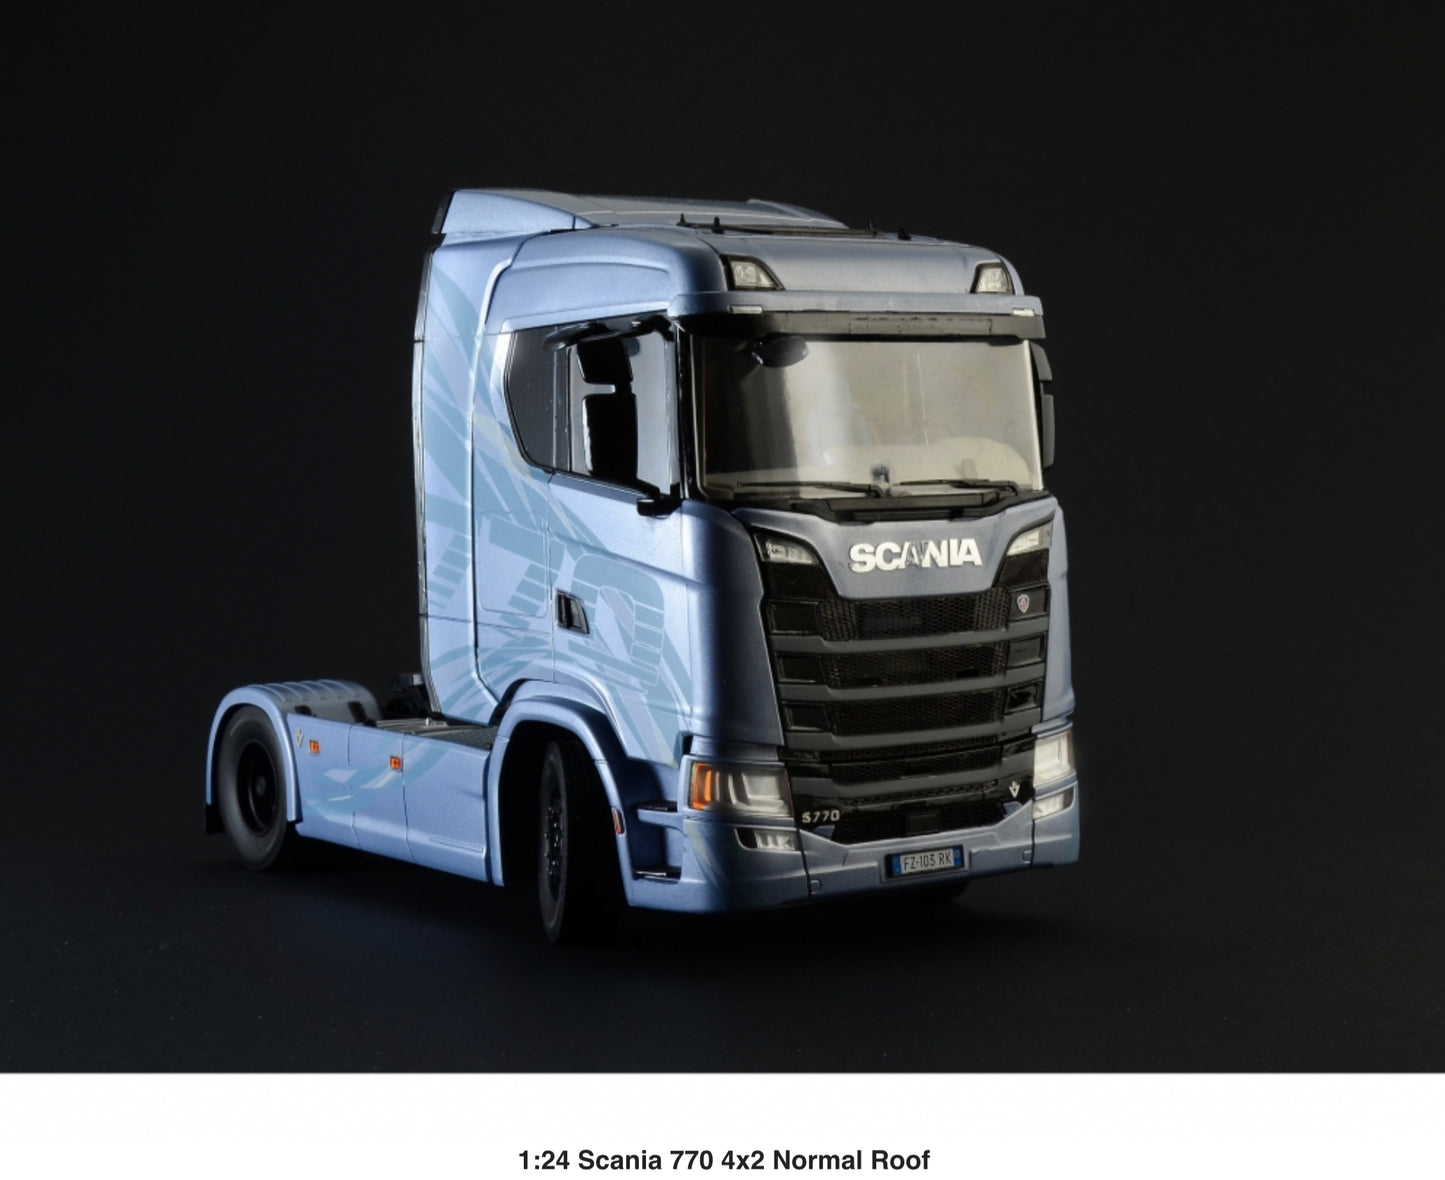 SCANIA 770 4X2 NORMAL ROOF